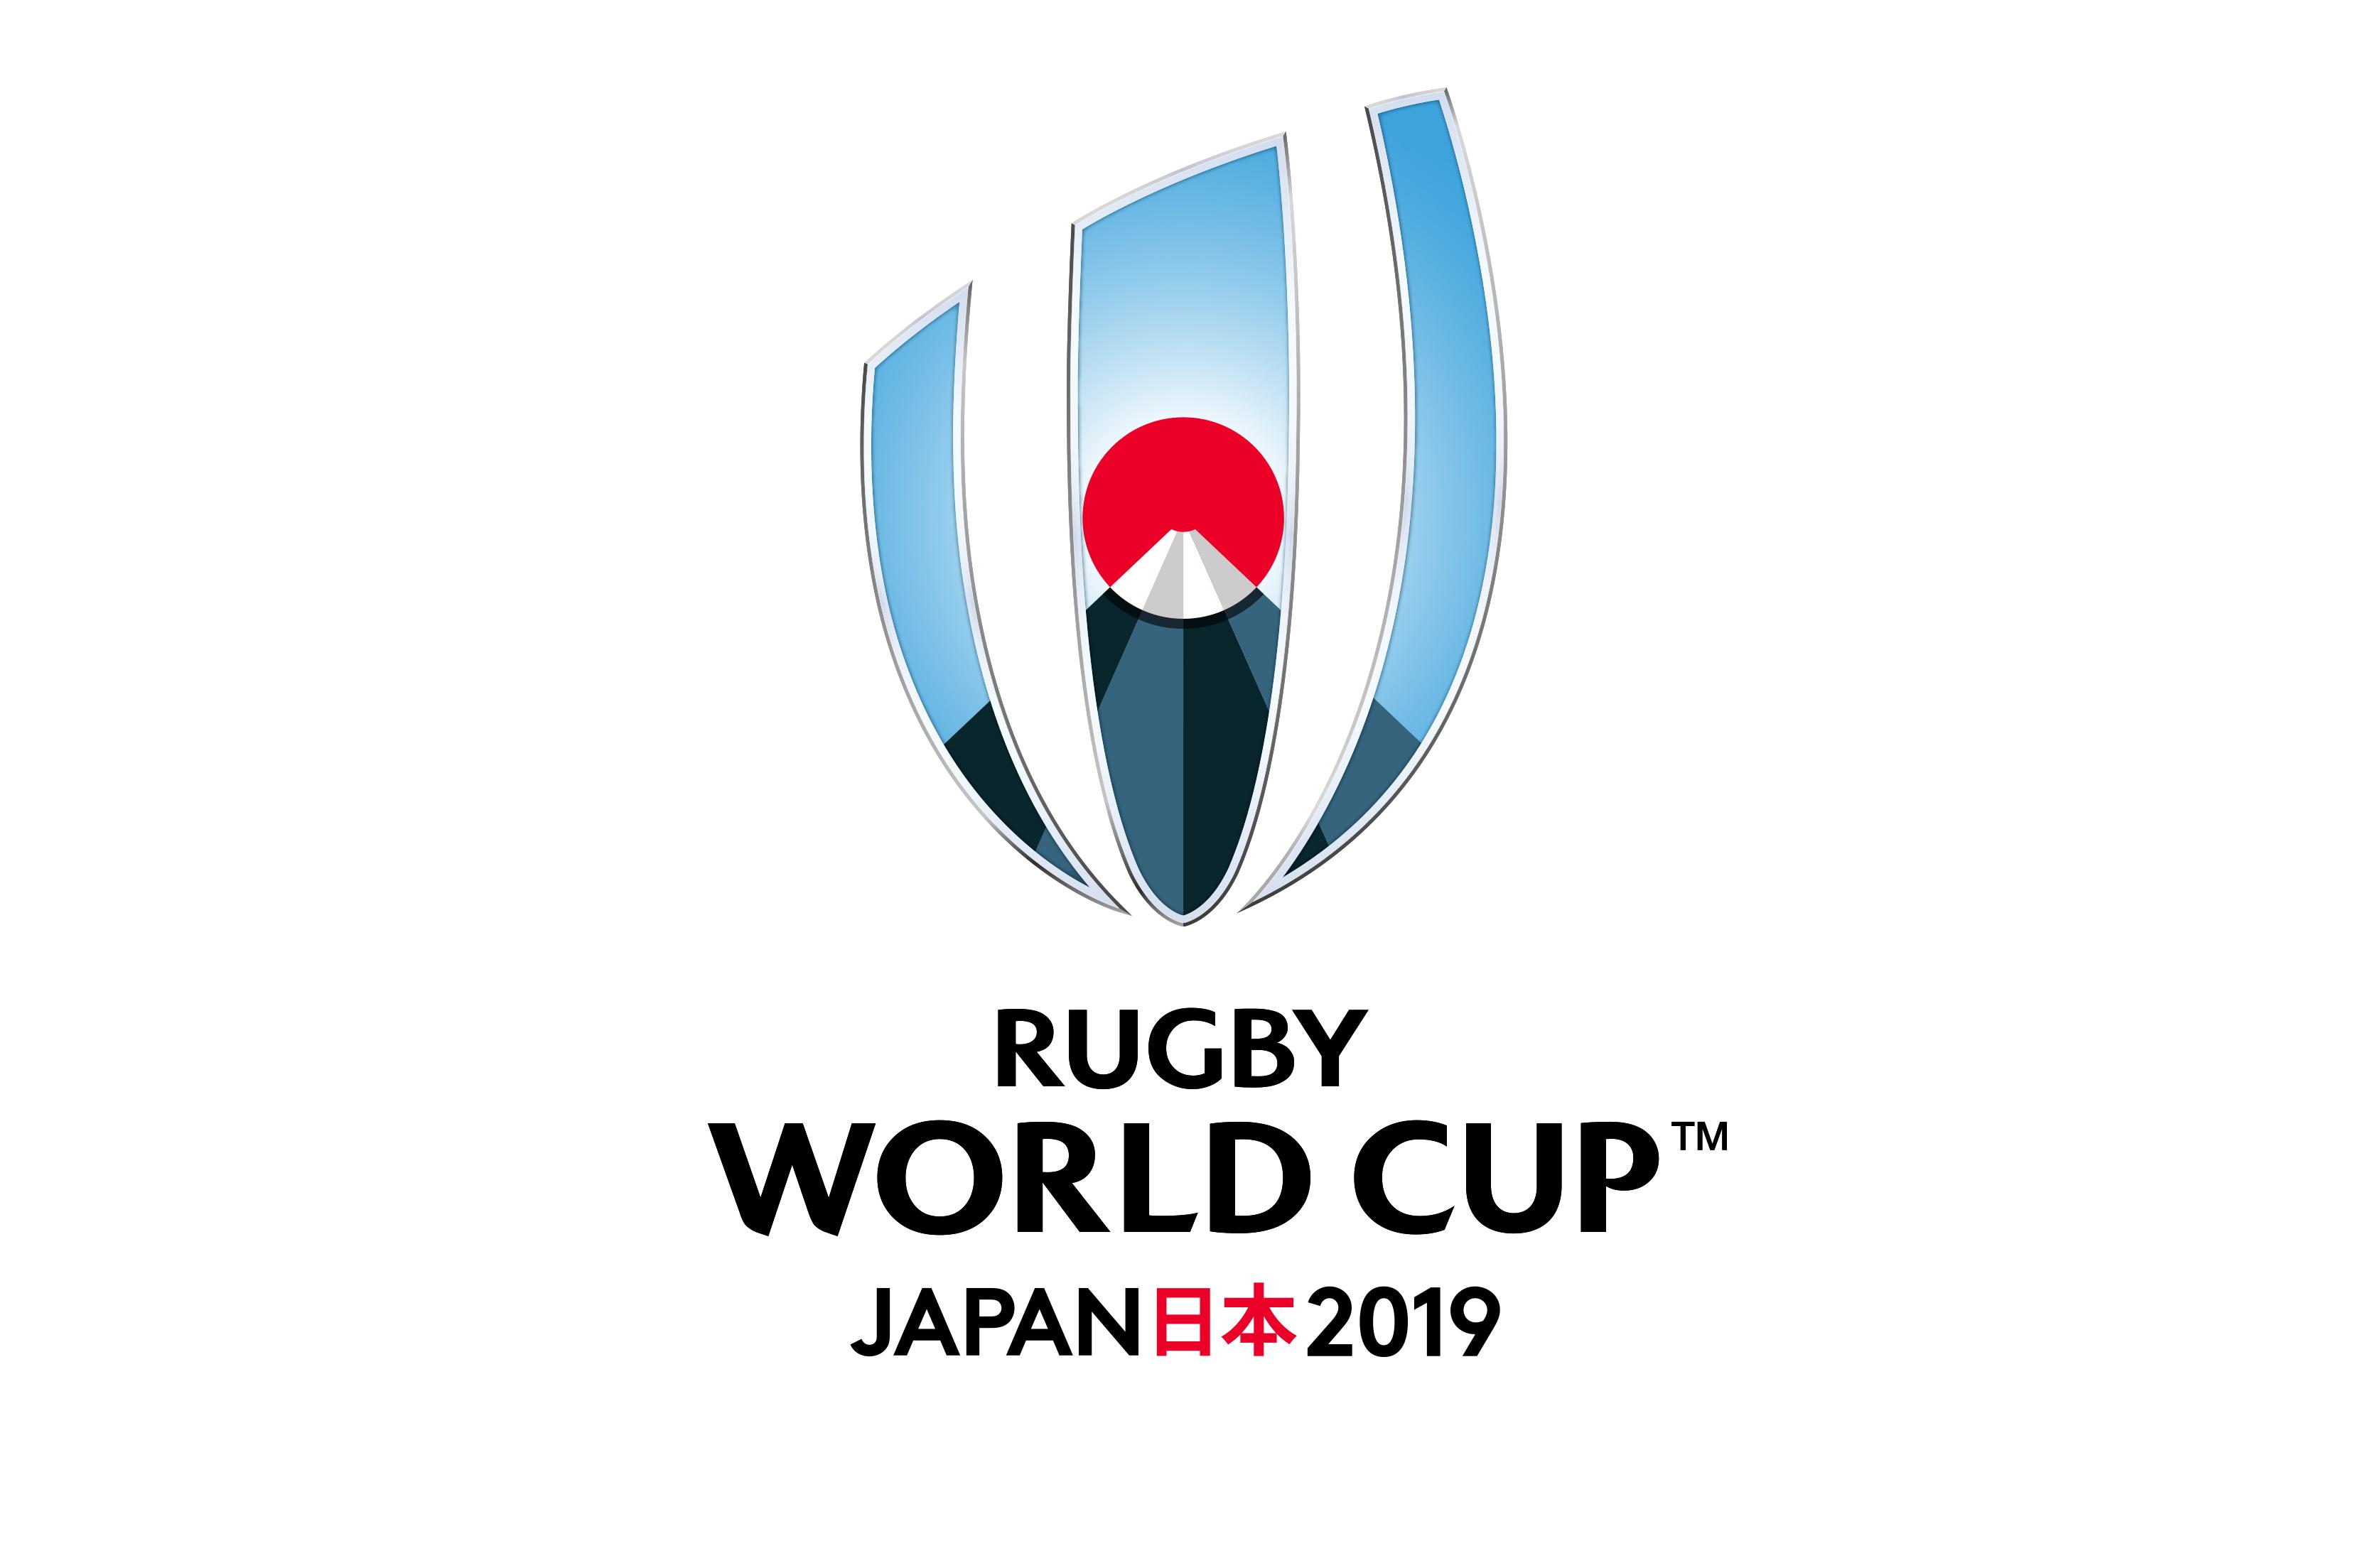 Rugby World Cup 2015 Backgrounds, Compatible - PC, Mobile, Gadgets| 3311x2207 px